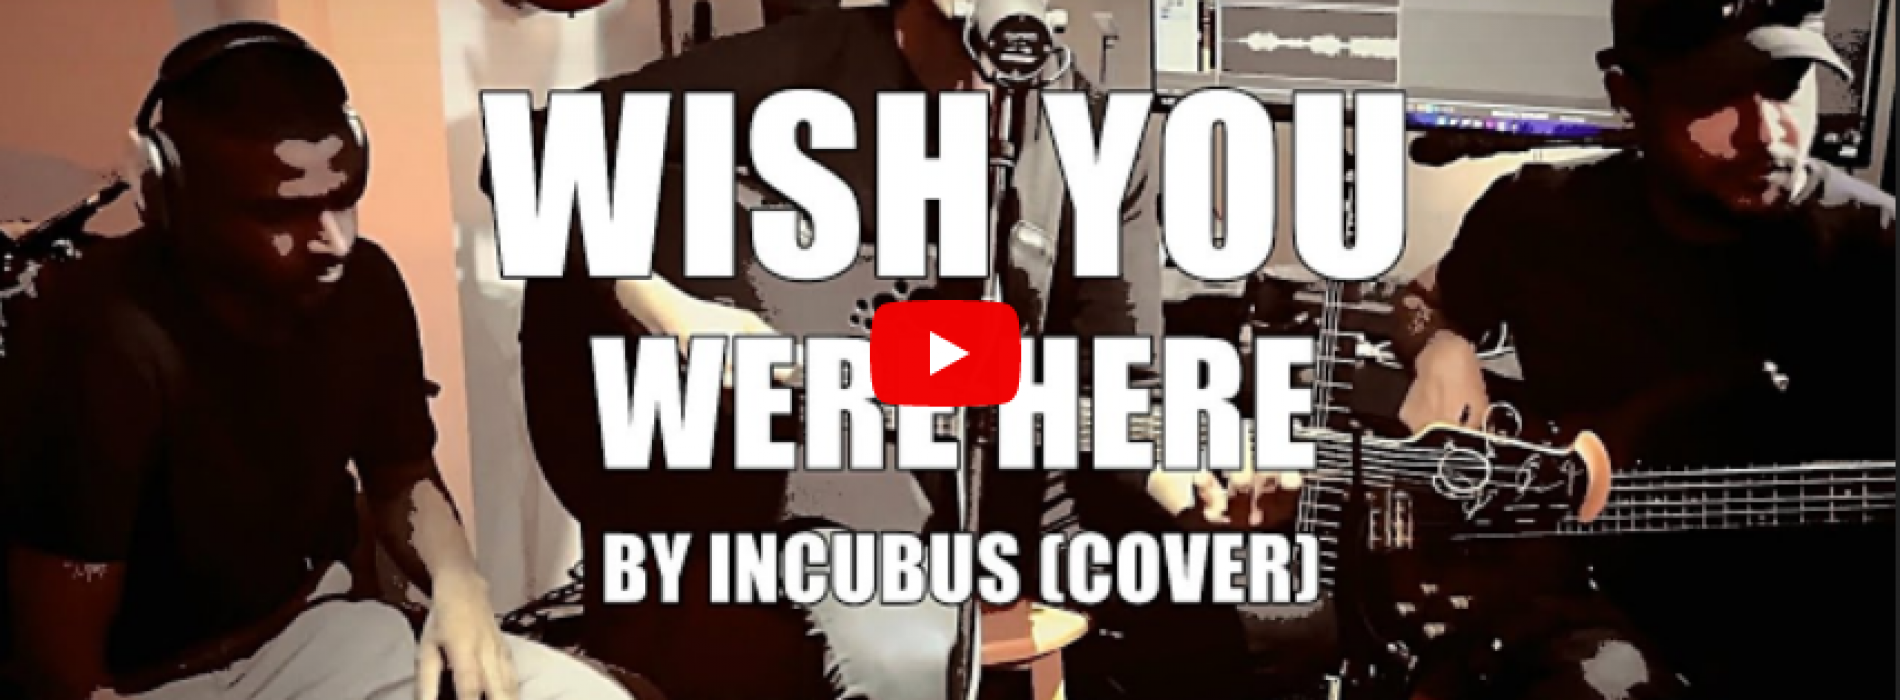 New Music : Wish You Were Here By Incubus (Cover By UFO)